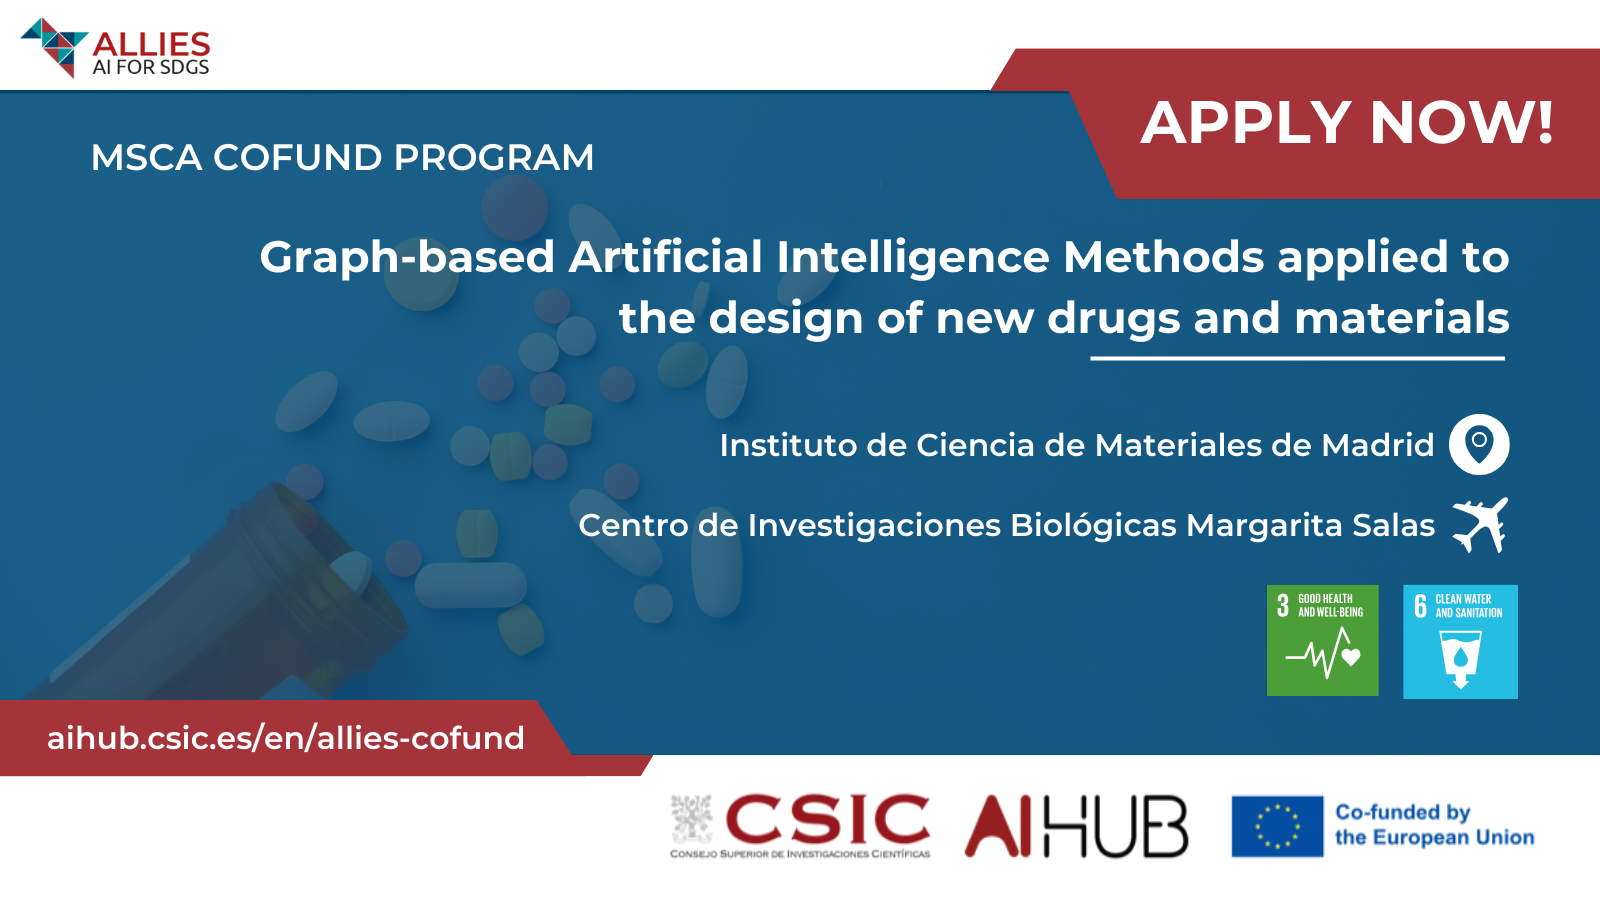 Graph-based Artificial Intelligence Methods for new drugs and materials design